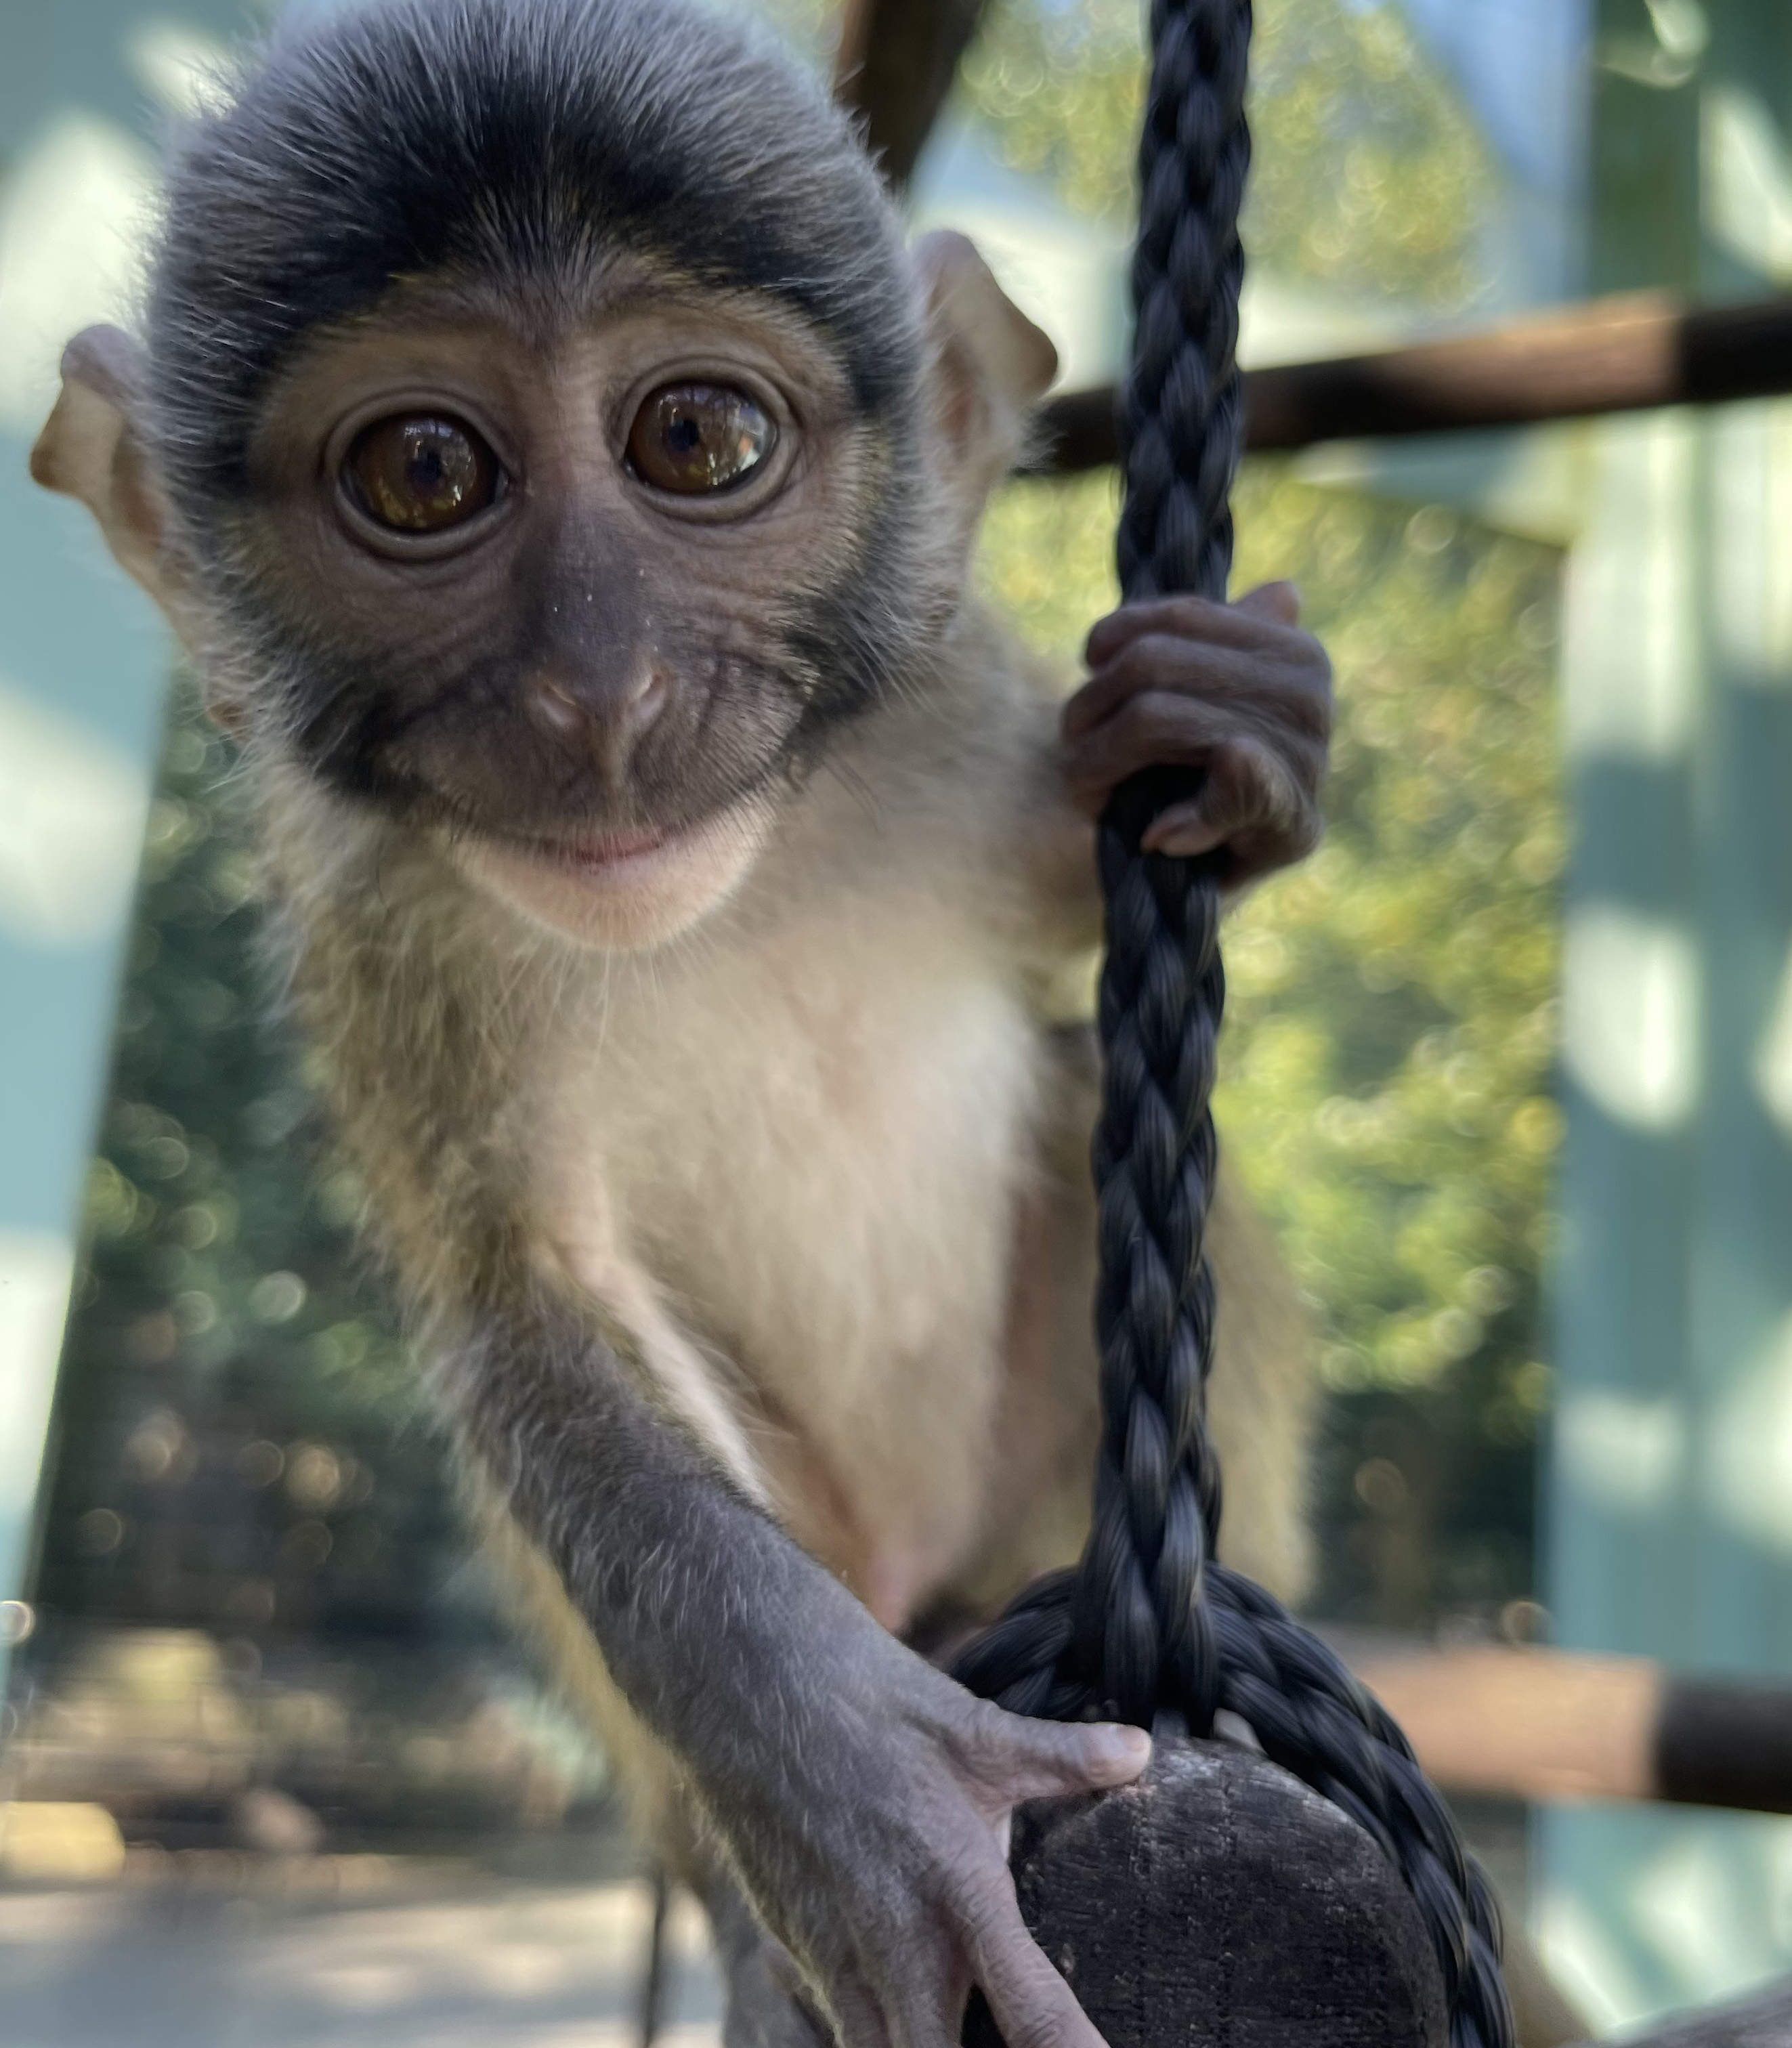 A juvenile swamp monkey looks into the camera and grasps a thin black rope with his paws.